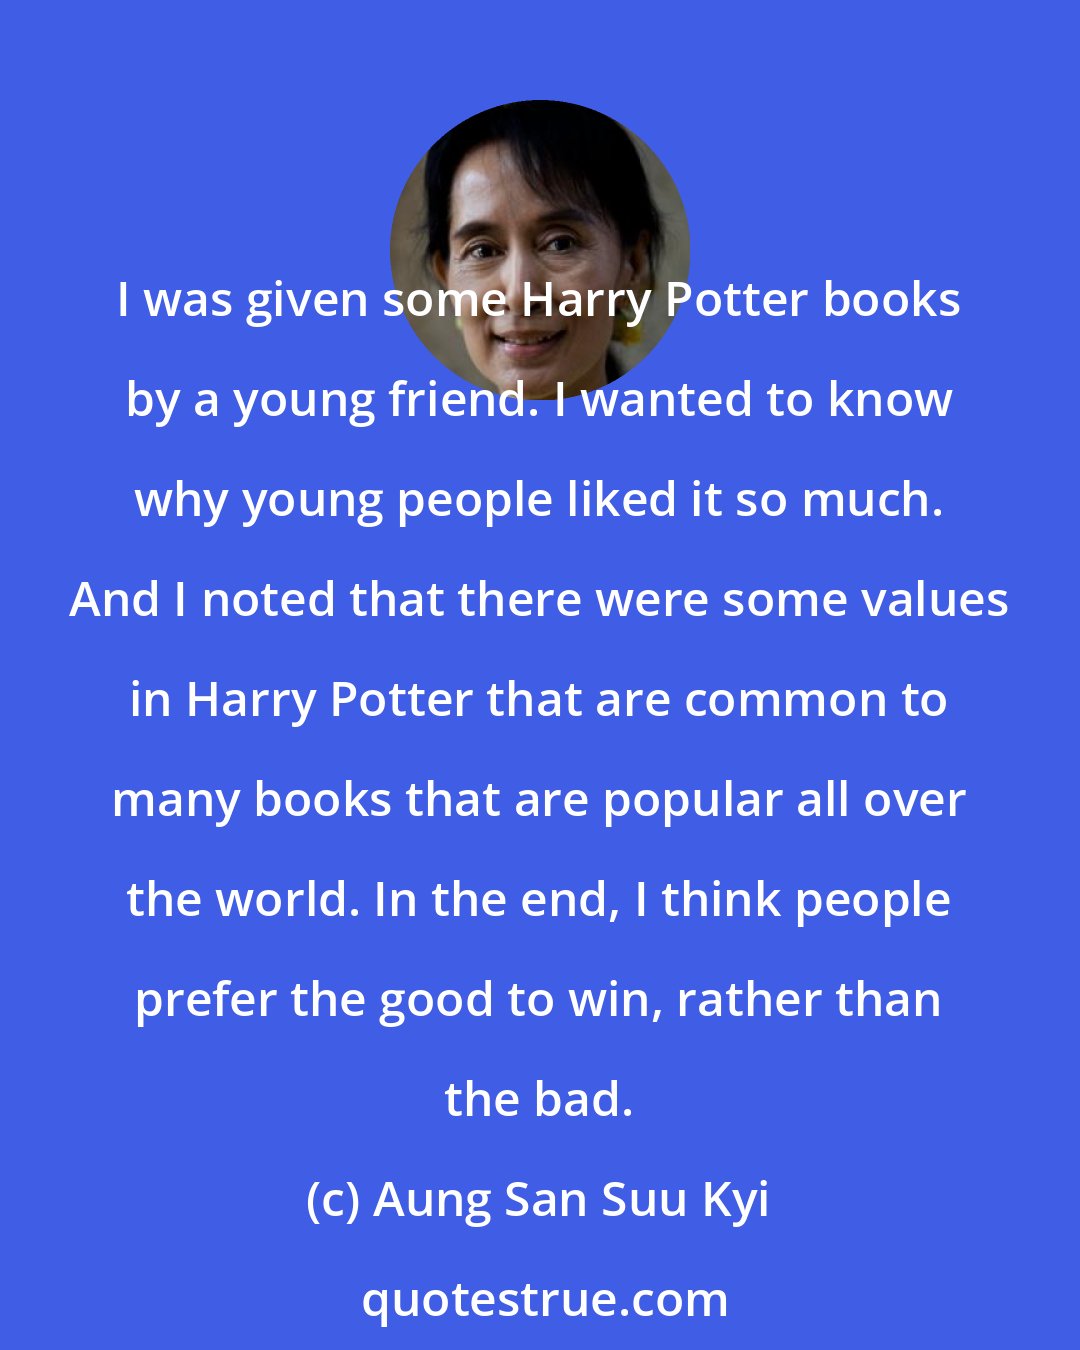 Aung San Suu Kyi: I was given some Harry Potter books by a young friend. I wanted to know why young people liked it so much. And I noted that there were some values in Harry Potter that are common to many books that are popular all over the world. In the end, I think people prefer the good to win, rather than the bad.